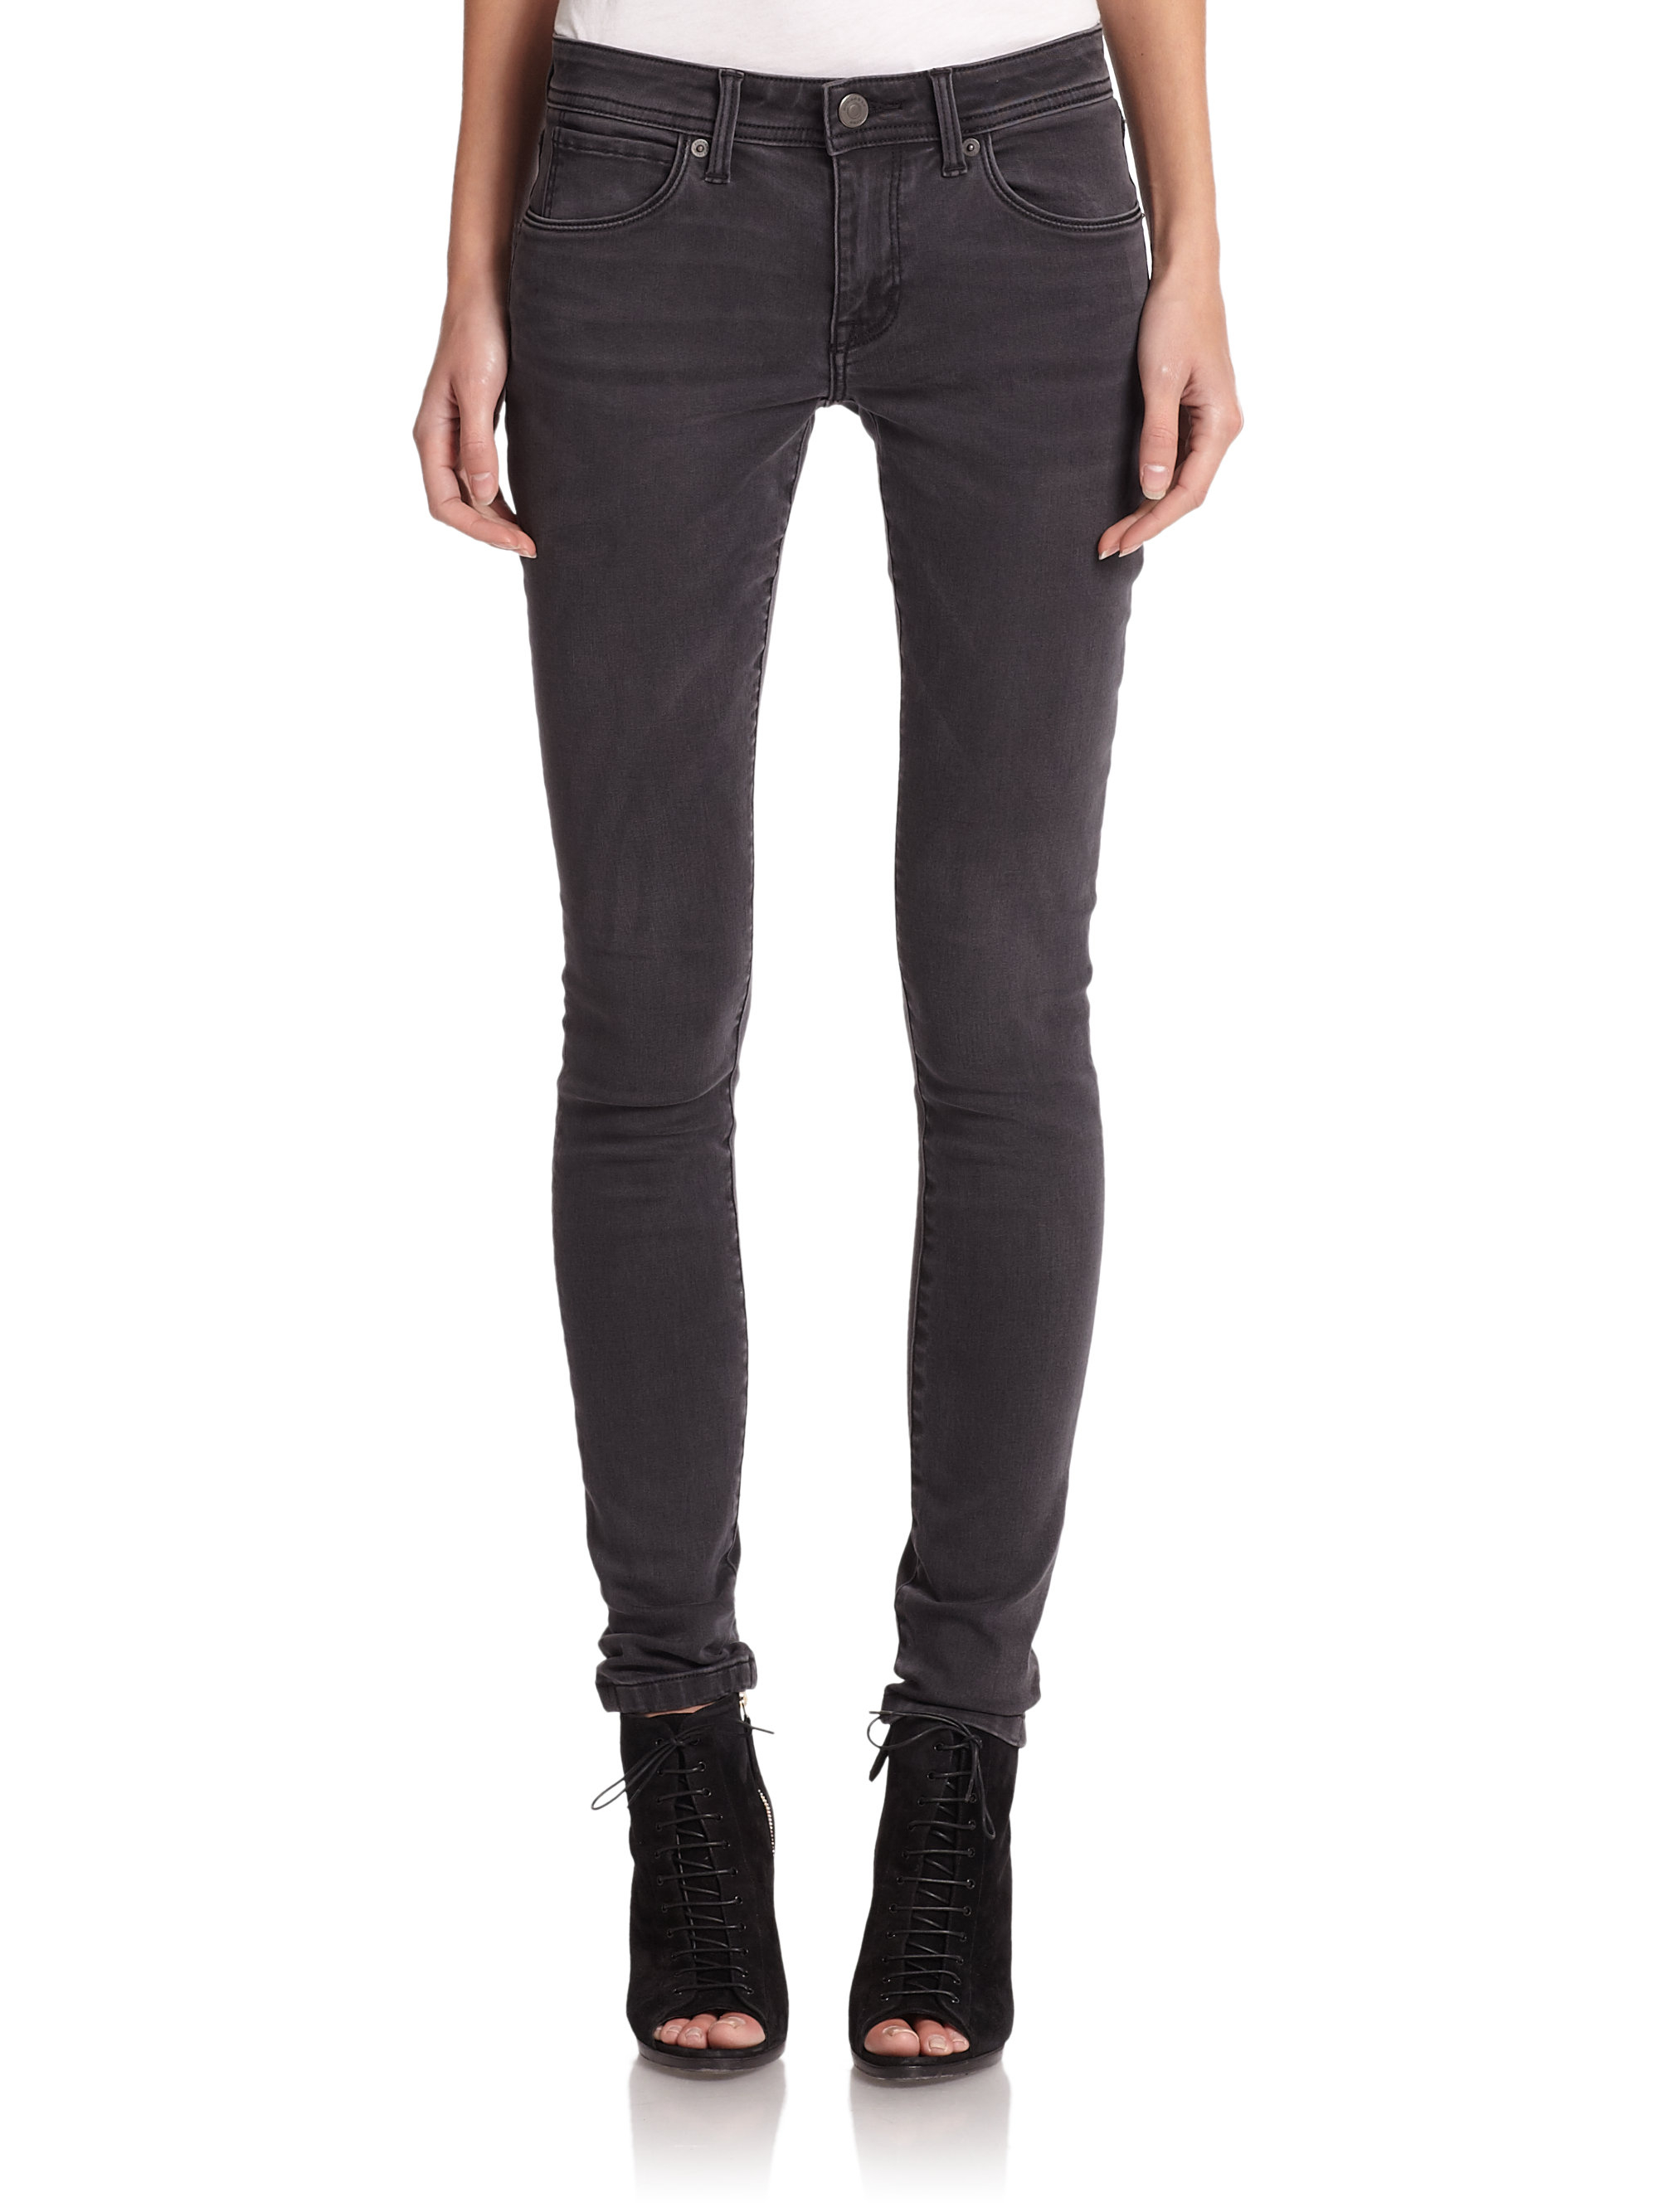 Lyst - Burberry Brit Skinny Jeans in Gray